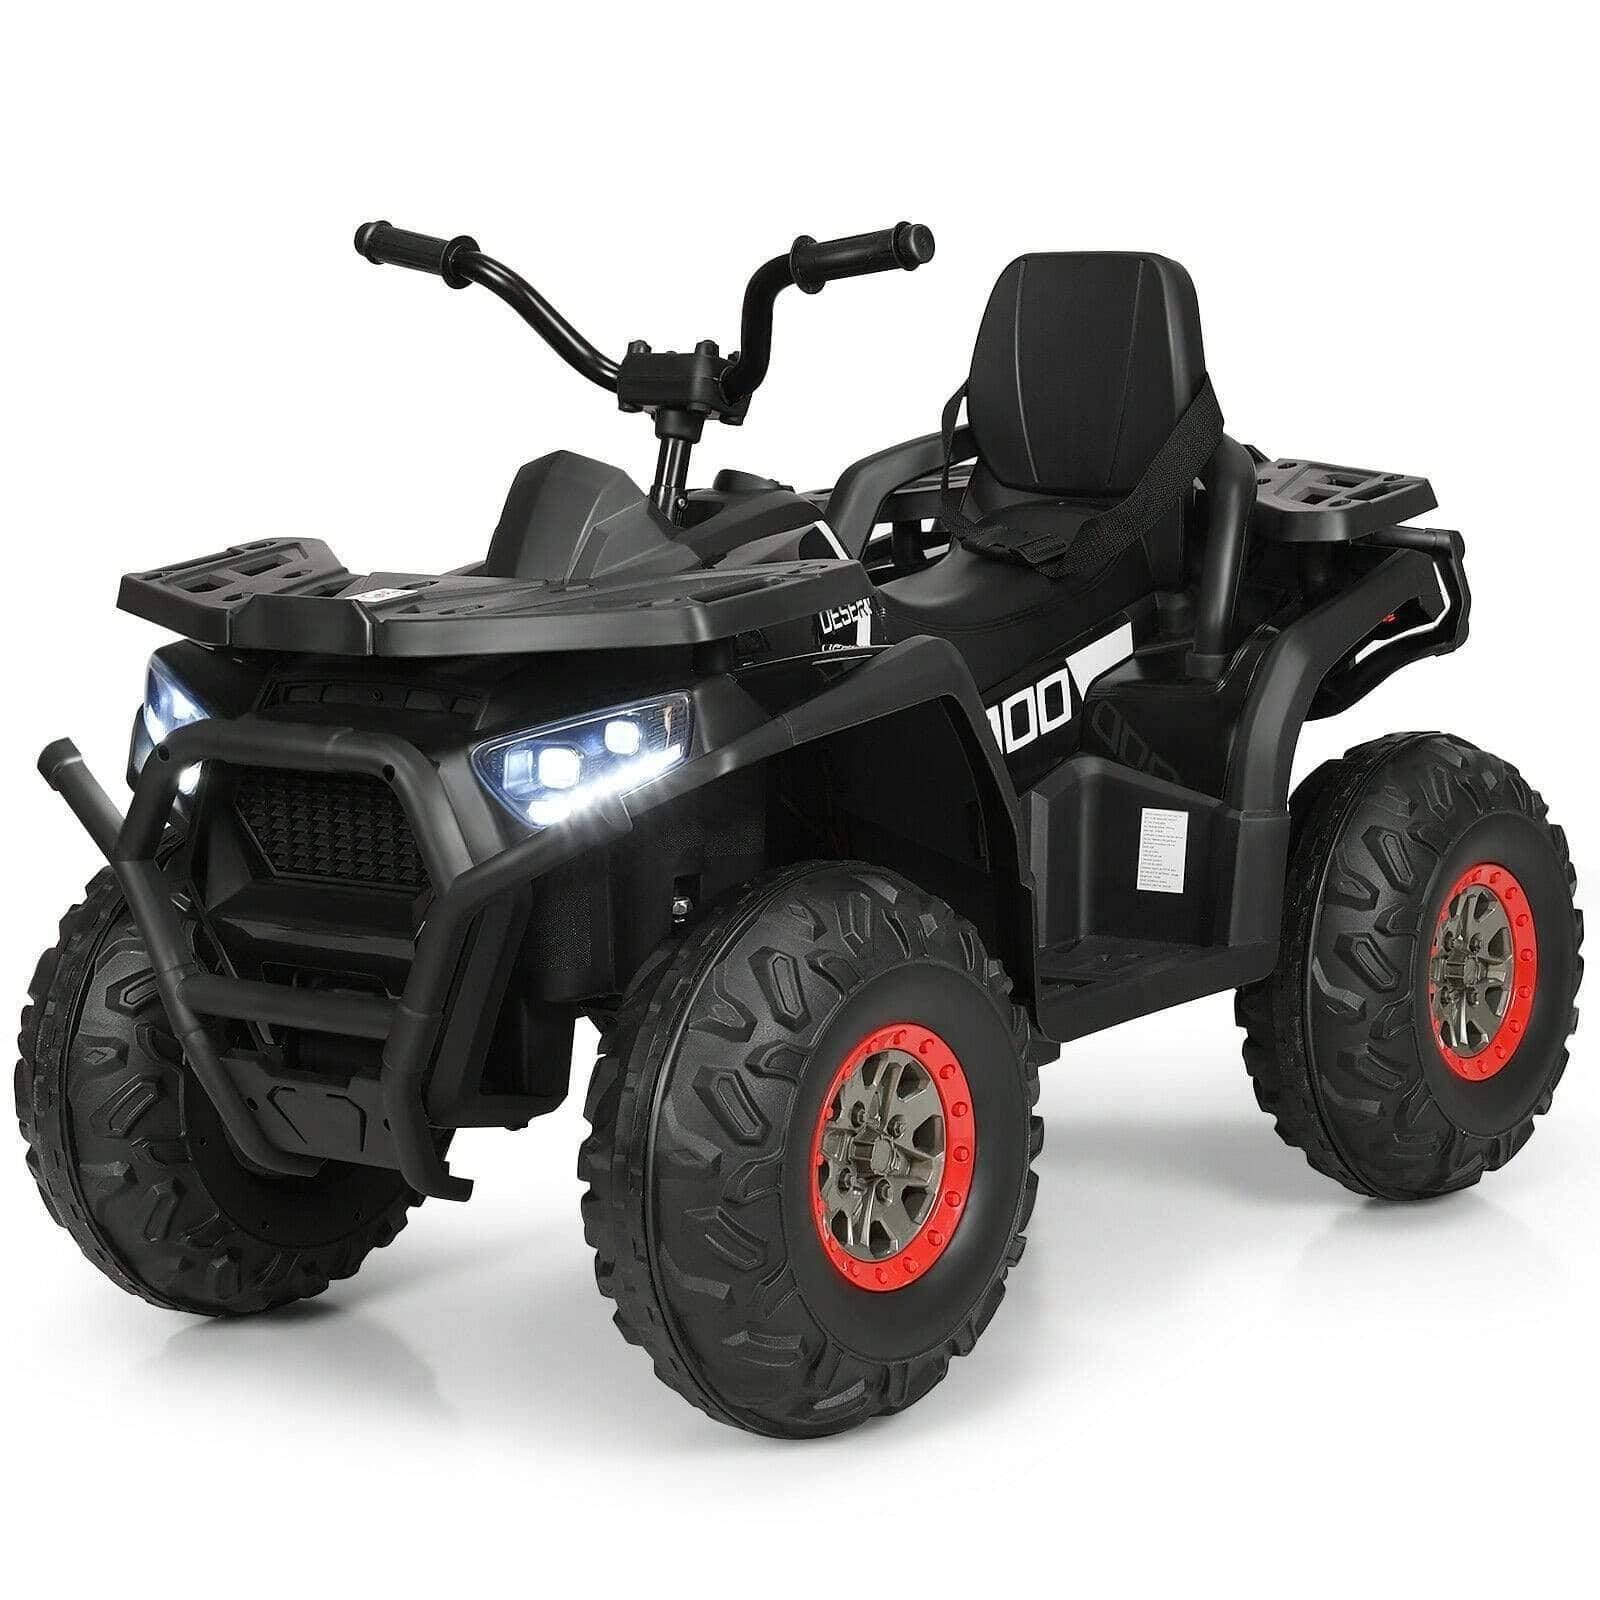 12 V Kids Electric 4-Wheeler ATV Quad with MP3 and LED Lights - Little Riderz